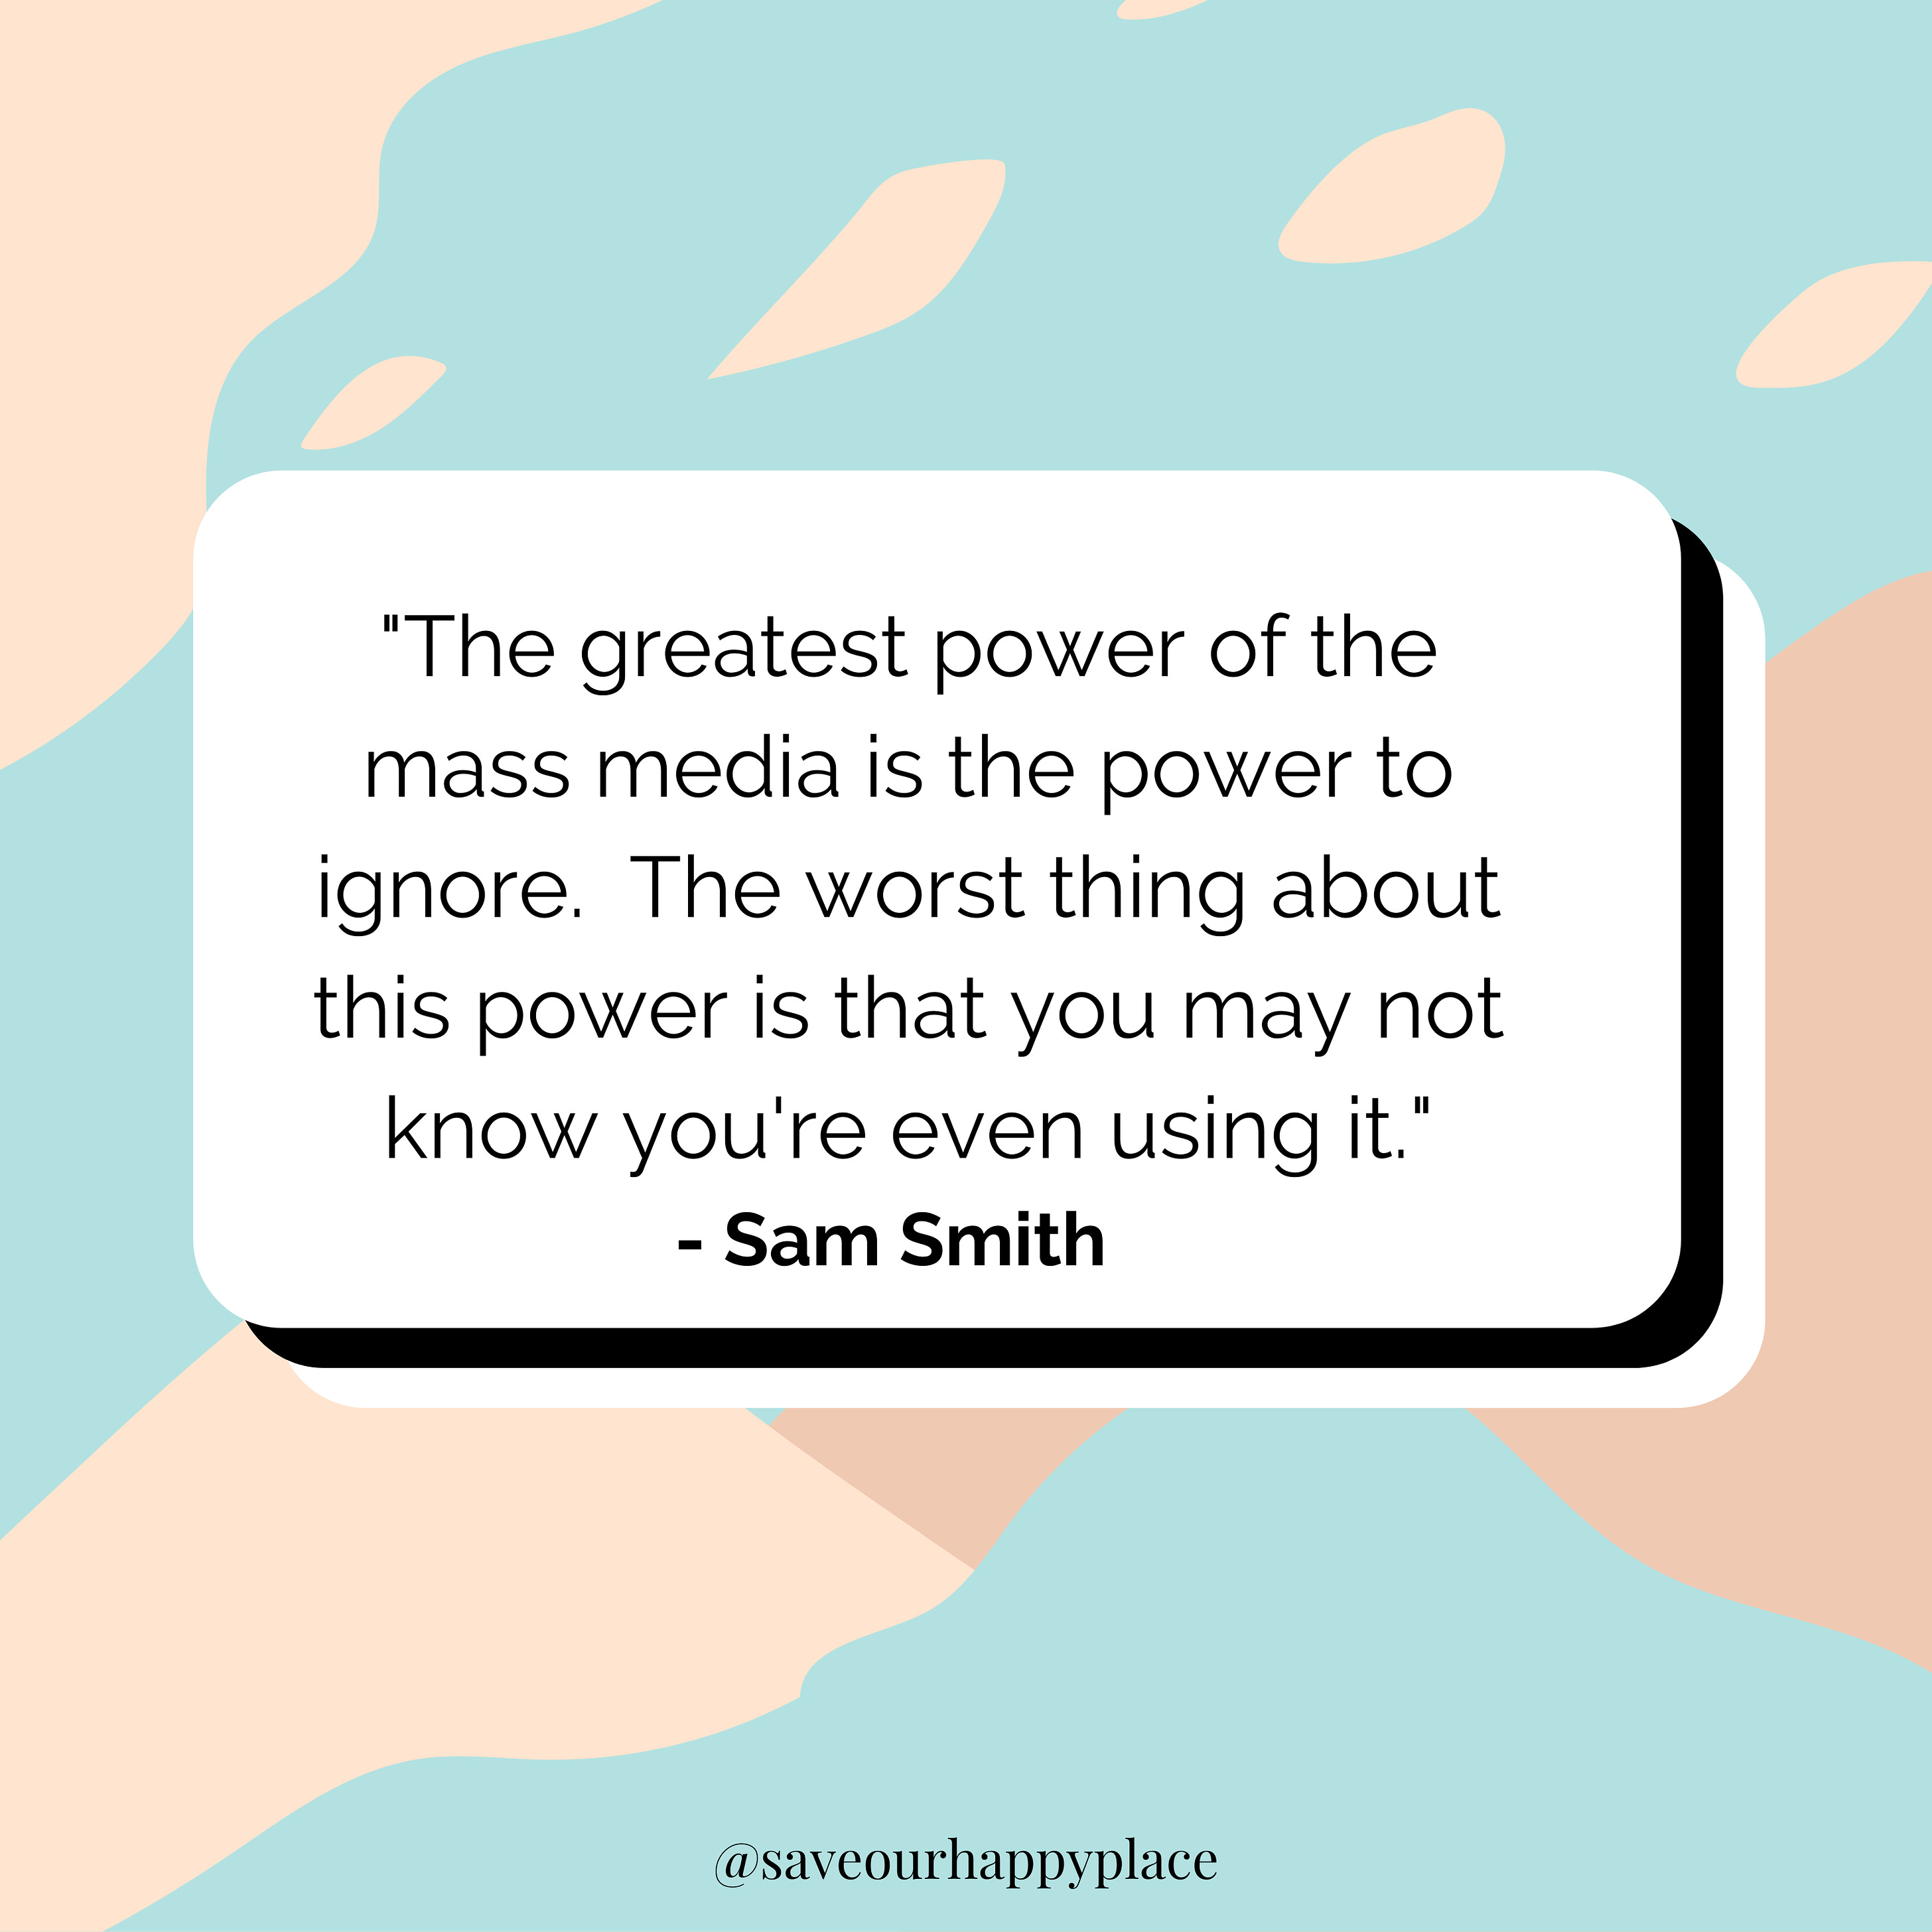 "The greatest power of the mass media is the power to ignore.  The worst thing about this power is that you may not know you're even using it." - Sam Smith  